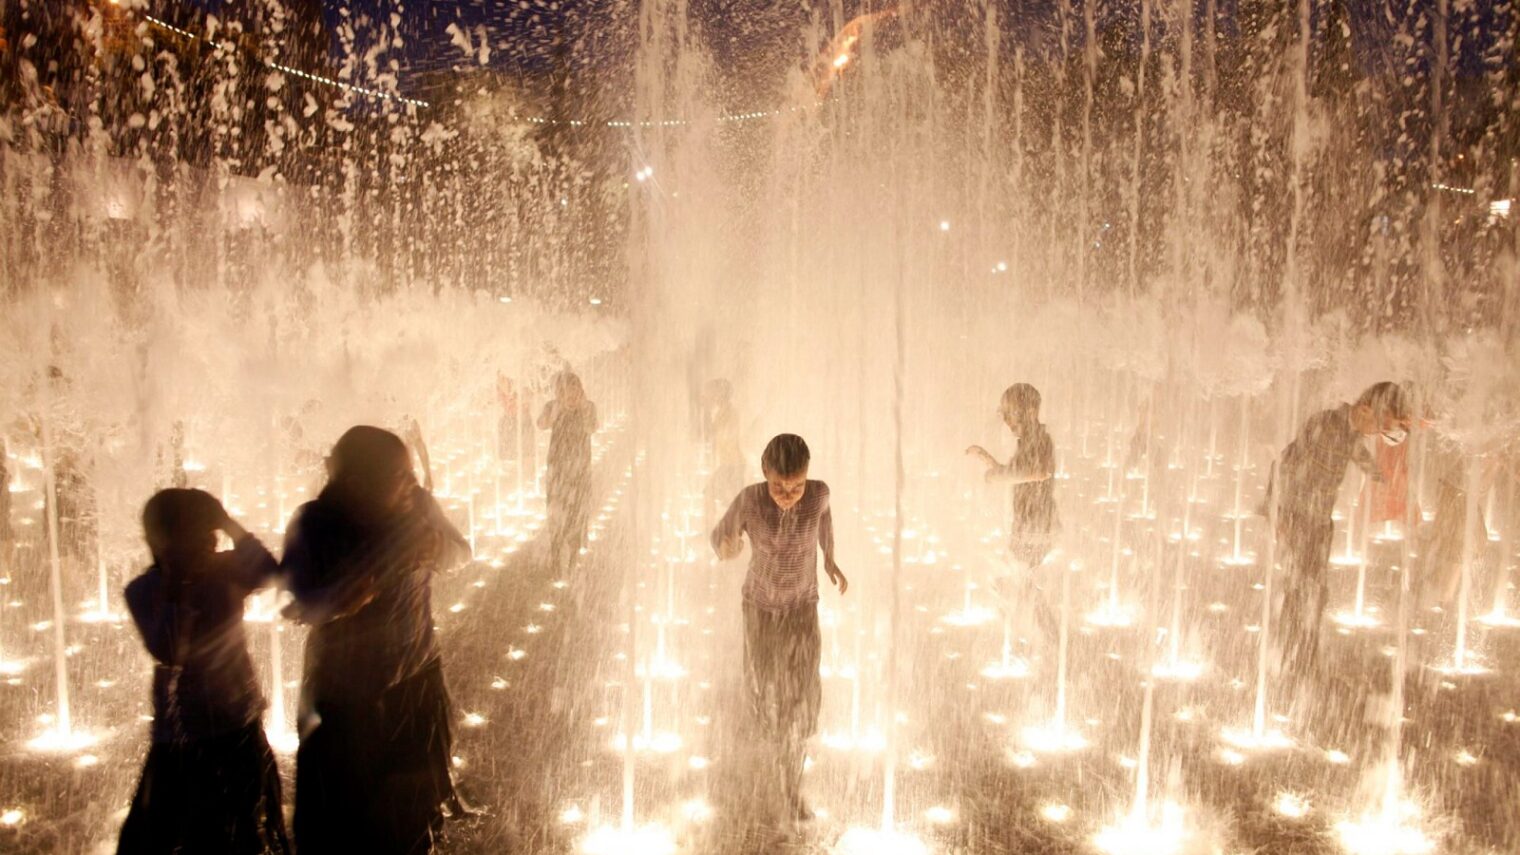 Children play in a fountain in Teddy Park opposite the Old City walls in Jerusalem. Photo by Zuzana Janku/Flash90